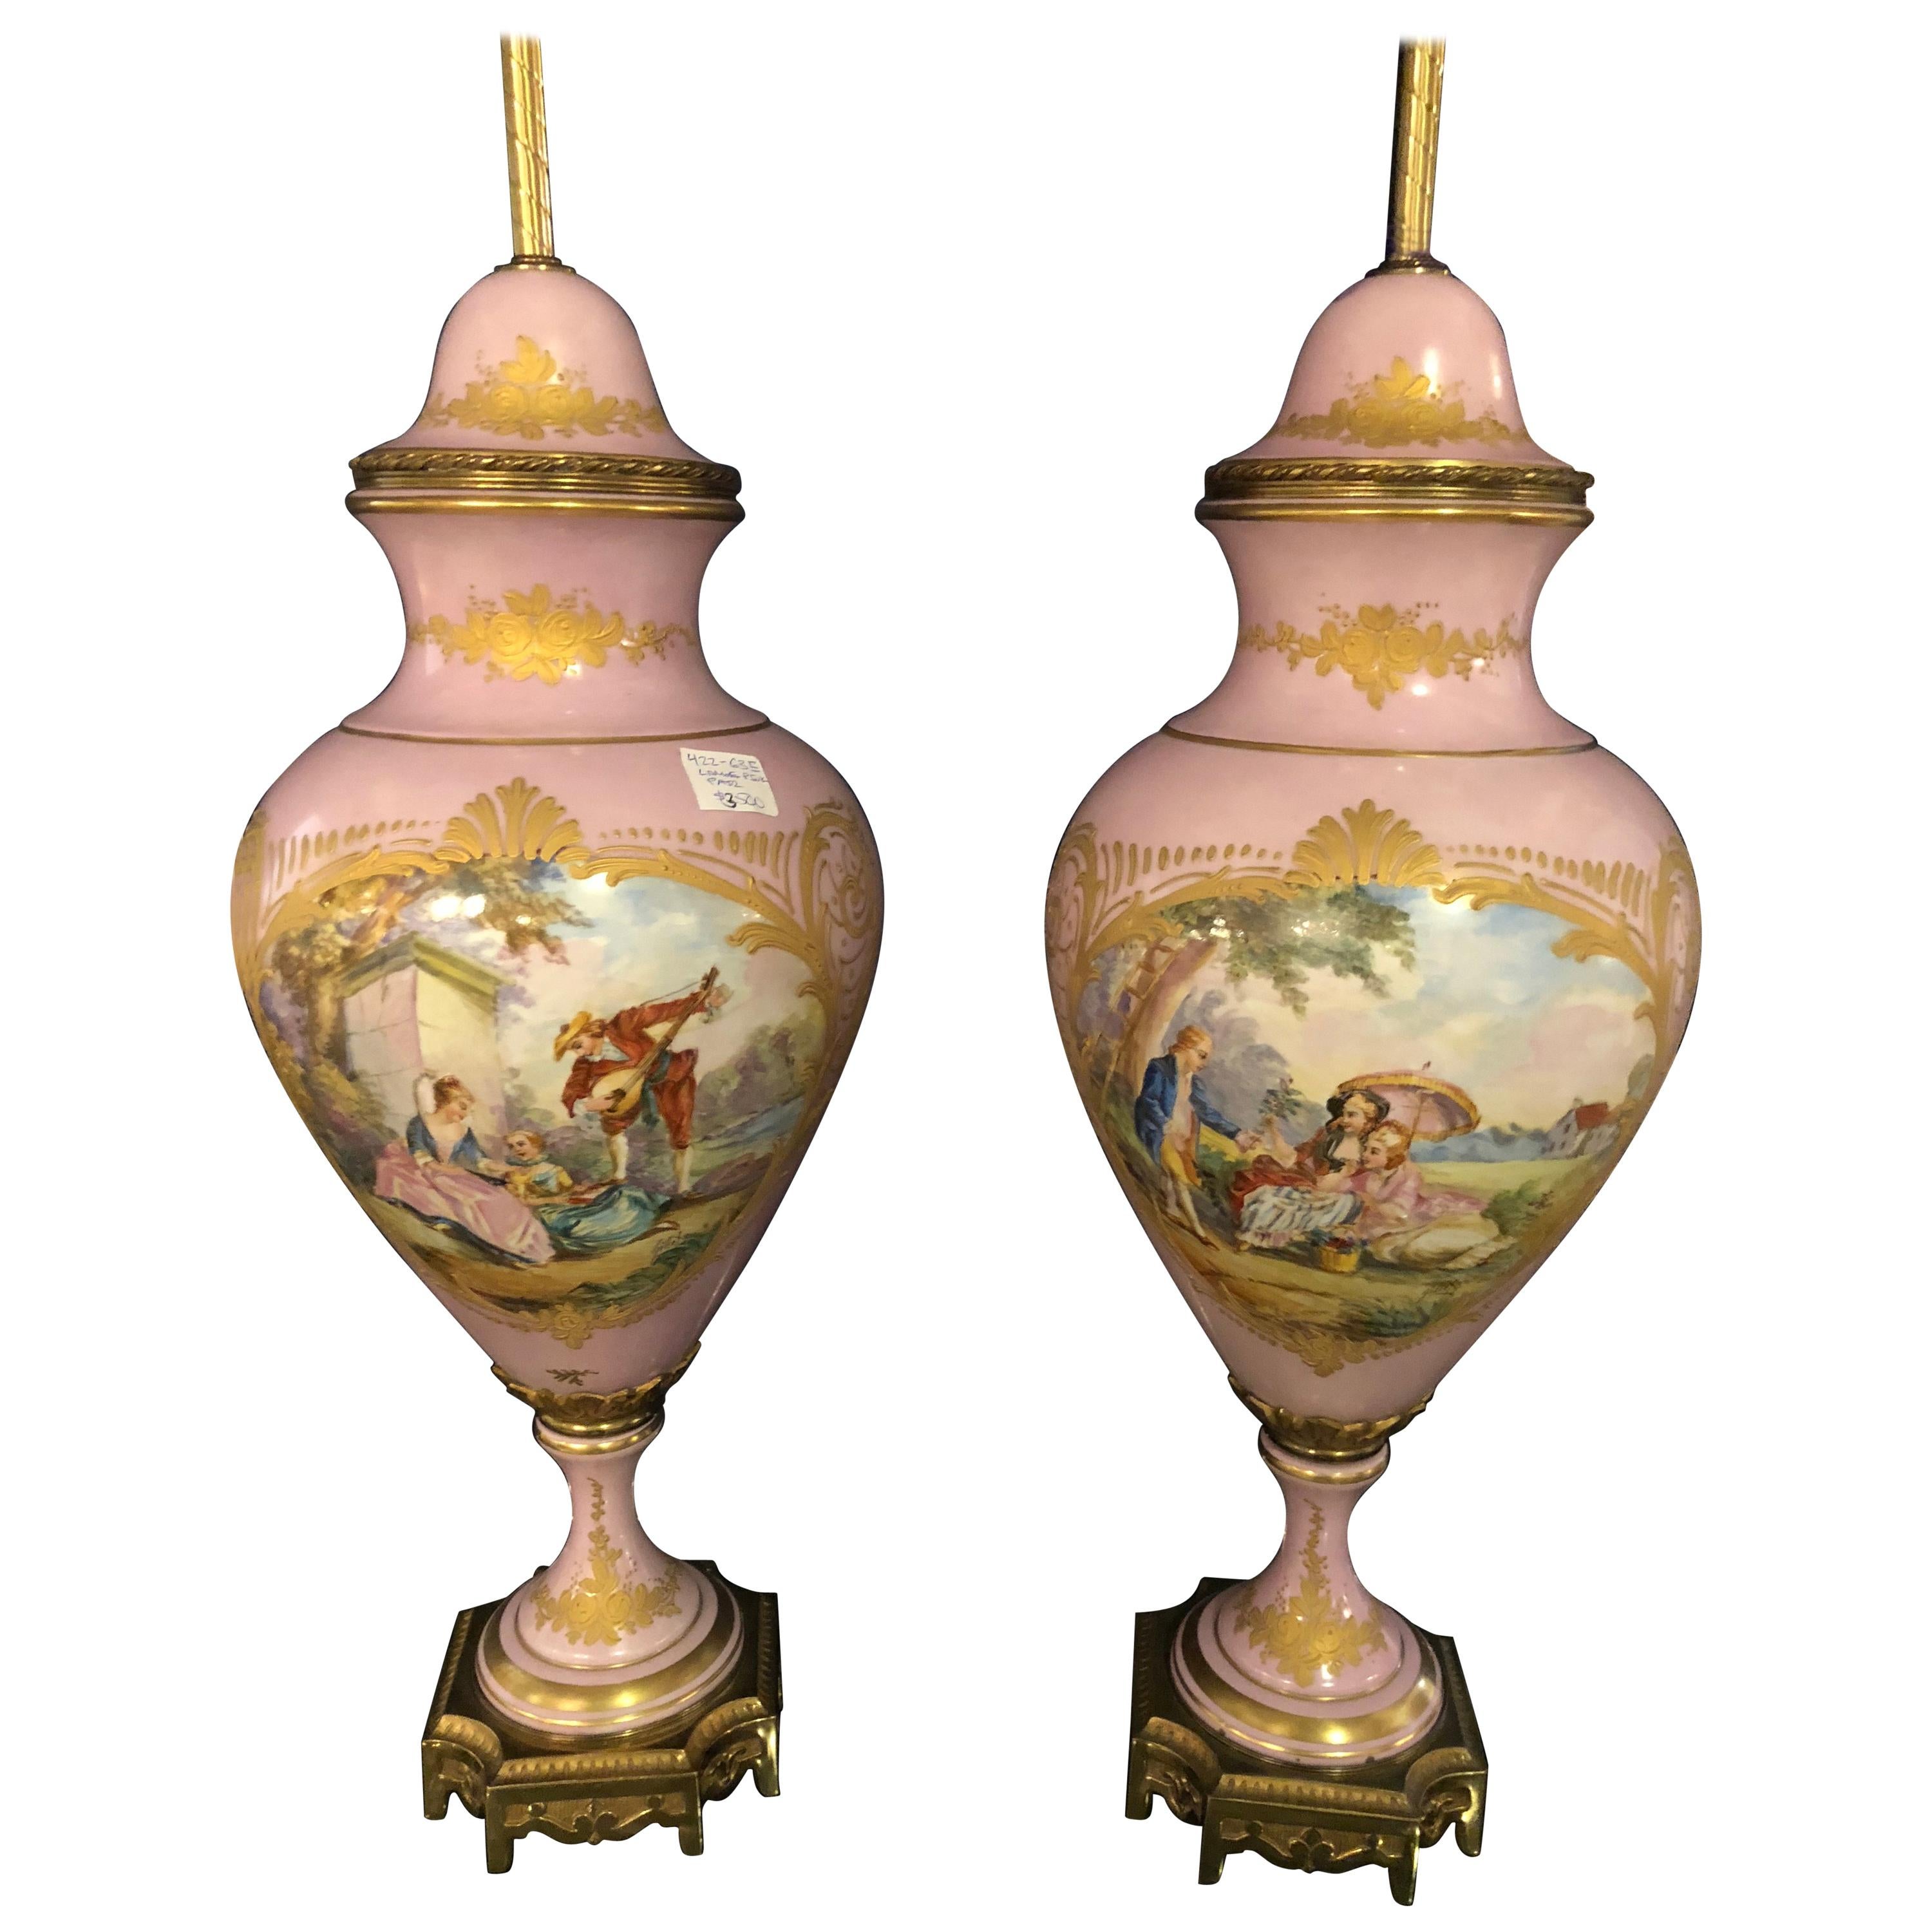 Pair of French Sevres Marked Monumental Pink Lidded Urn Table Lamps Signed